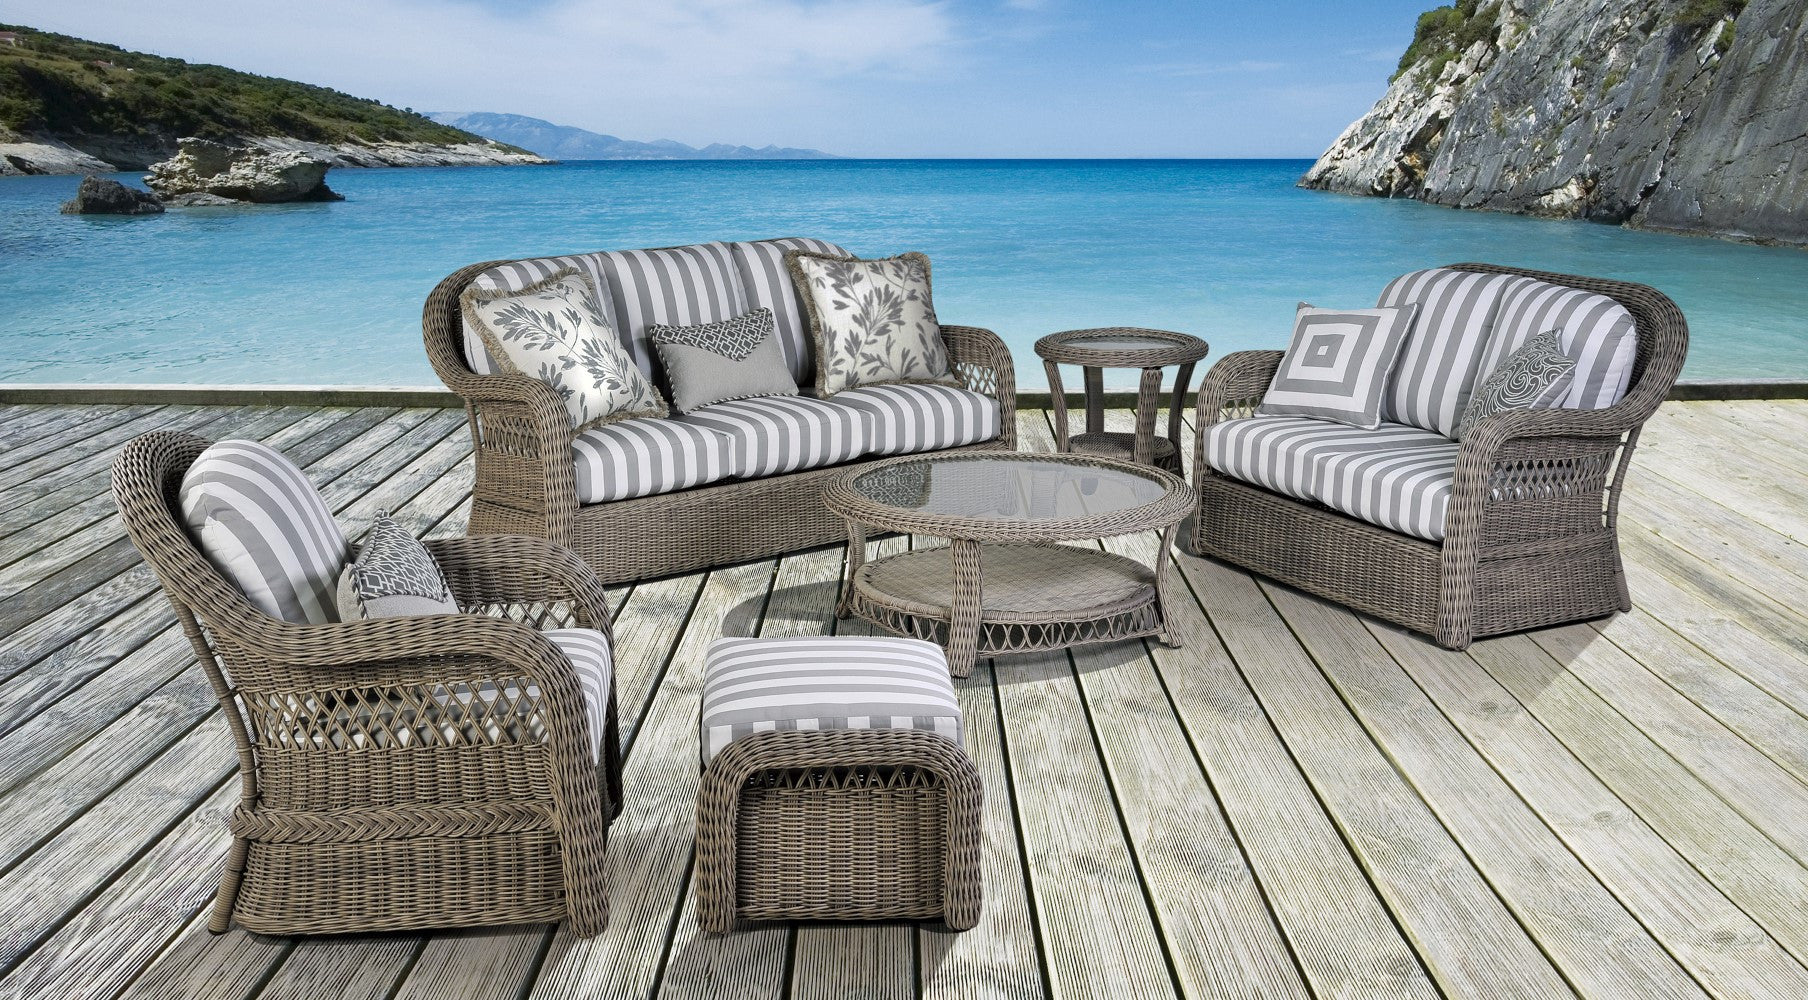 South Sea Rattan South Sea Rattan Arcadia Wicker Arm Chair with a Driftwood Finish Chair - Rattan Imports